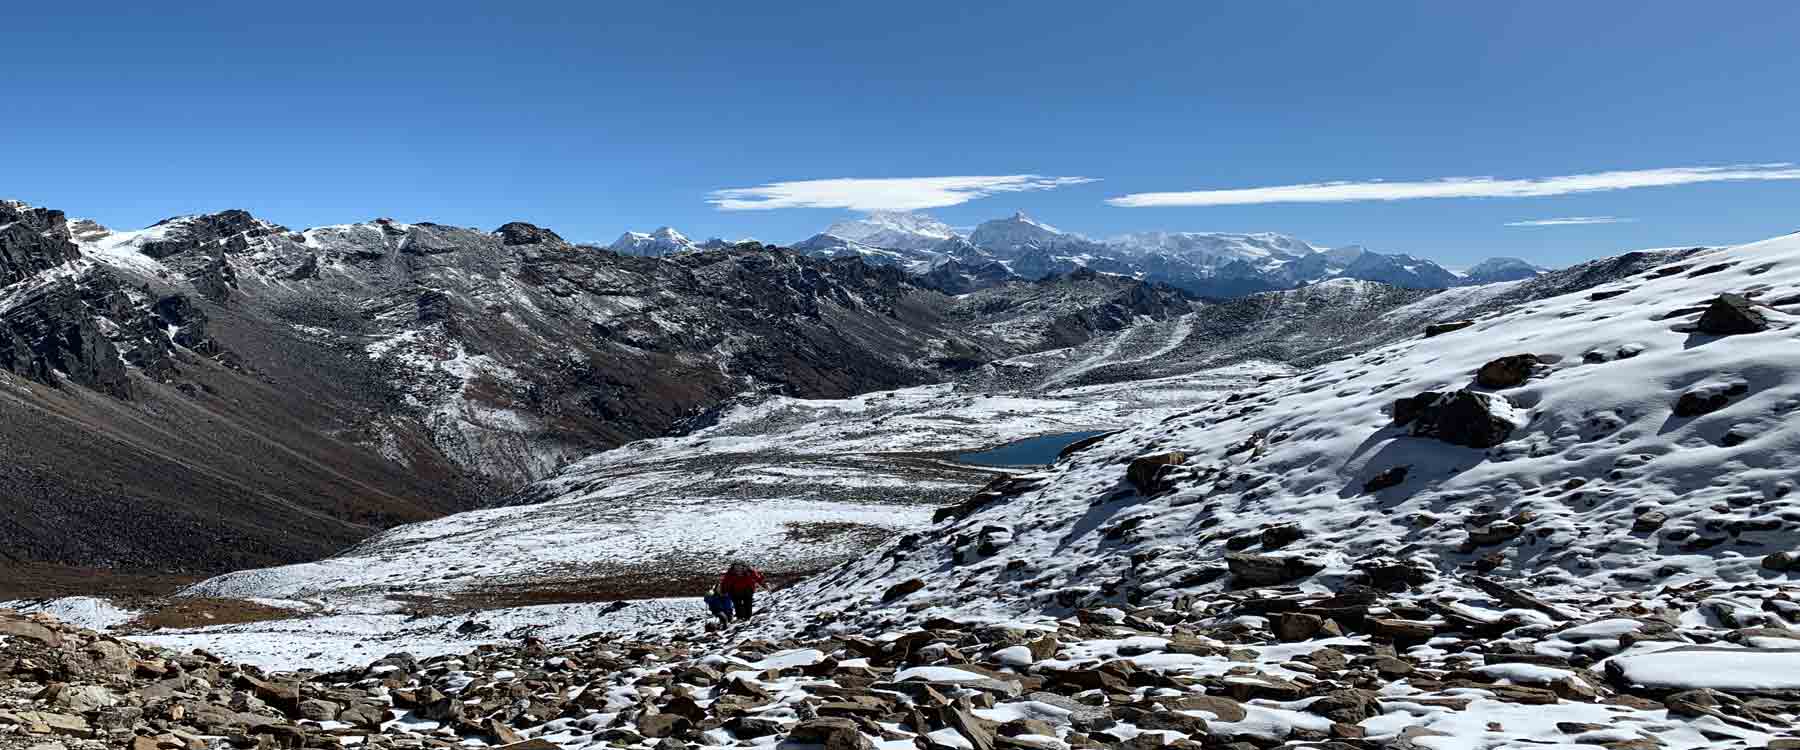 What are the best things to do during the Kanchenjunga base camp Trek